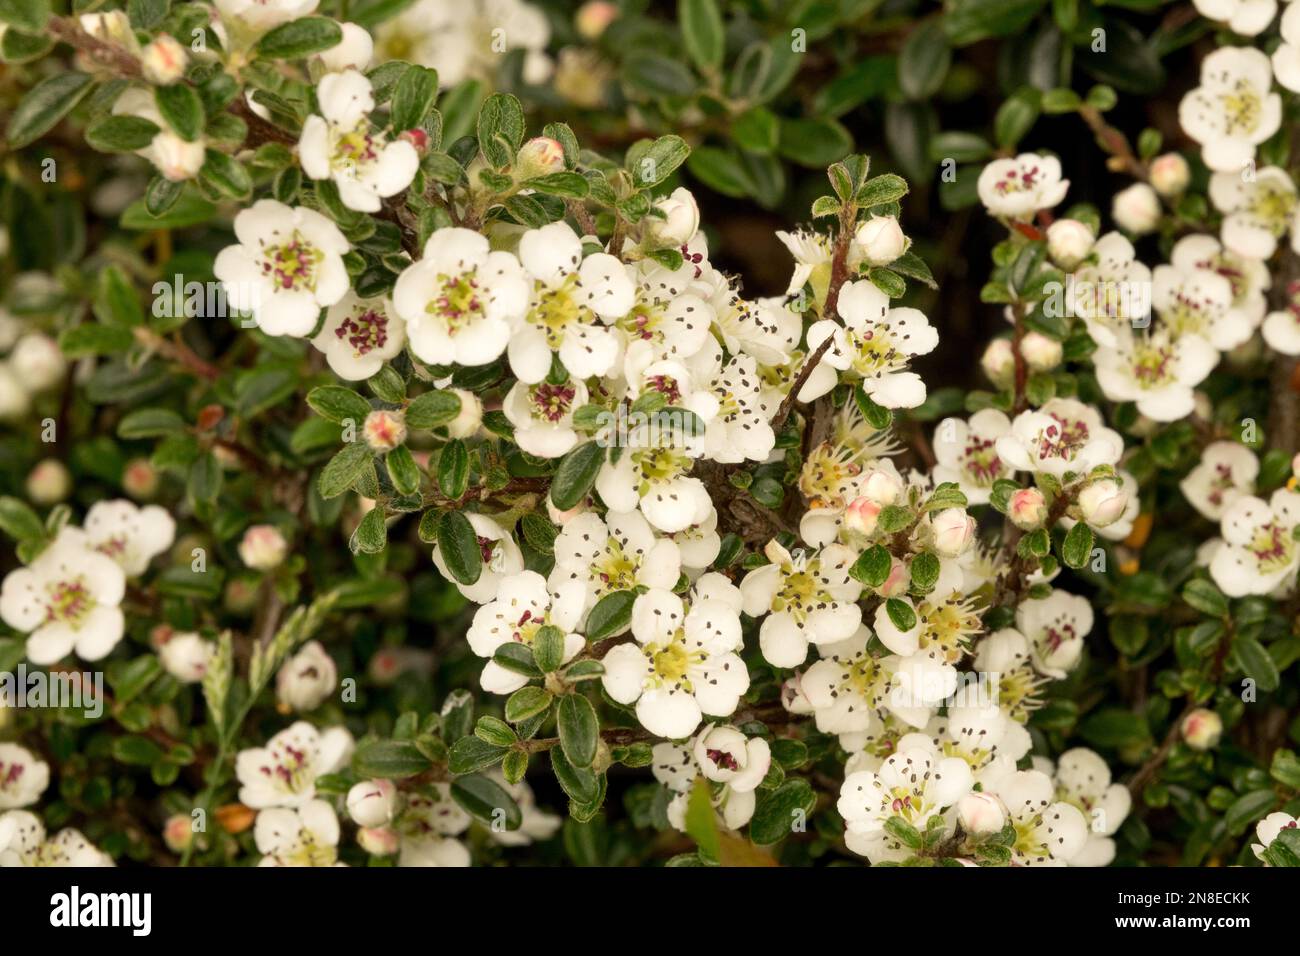 Cotoneaster integrifolius 'Silver Shadow', Cotoneaster, Flowers, White, Flowering, Small-Leafed, Blooming, Blooms, Plant Stock Photo